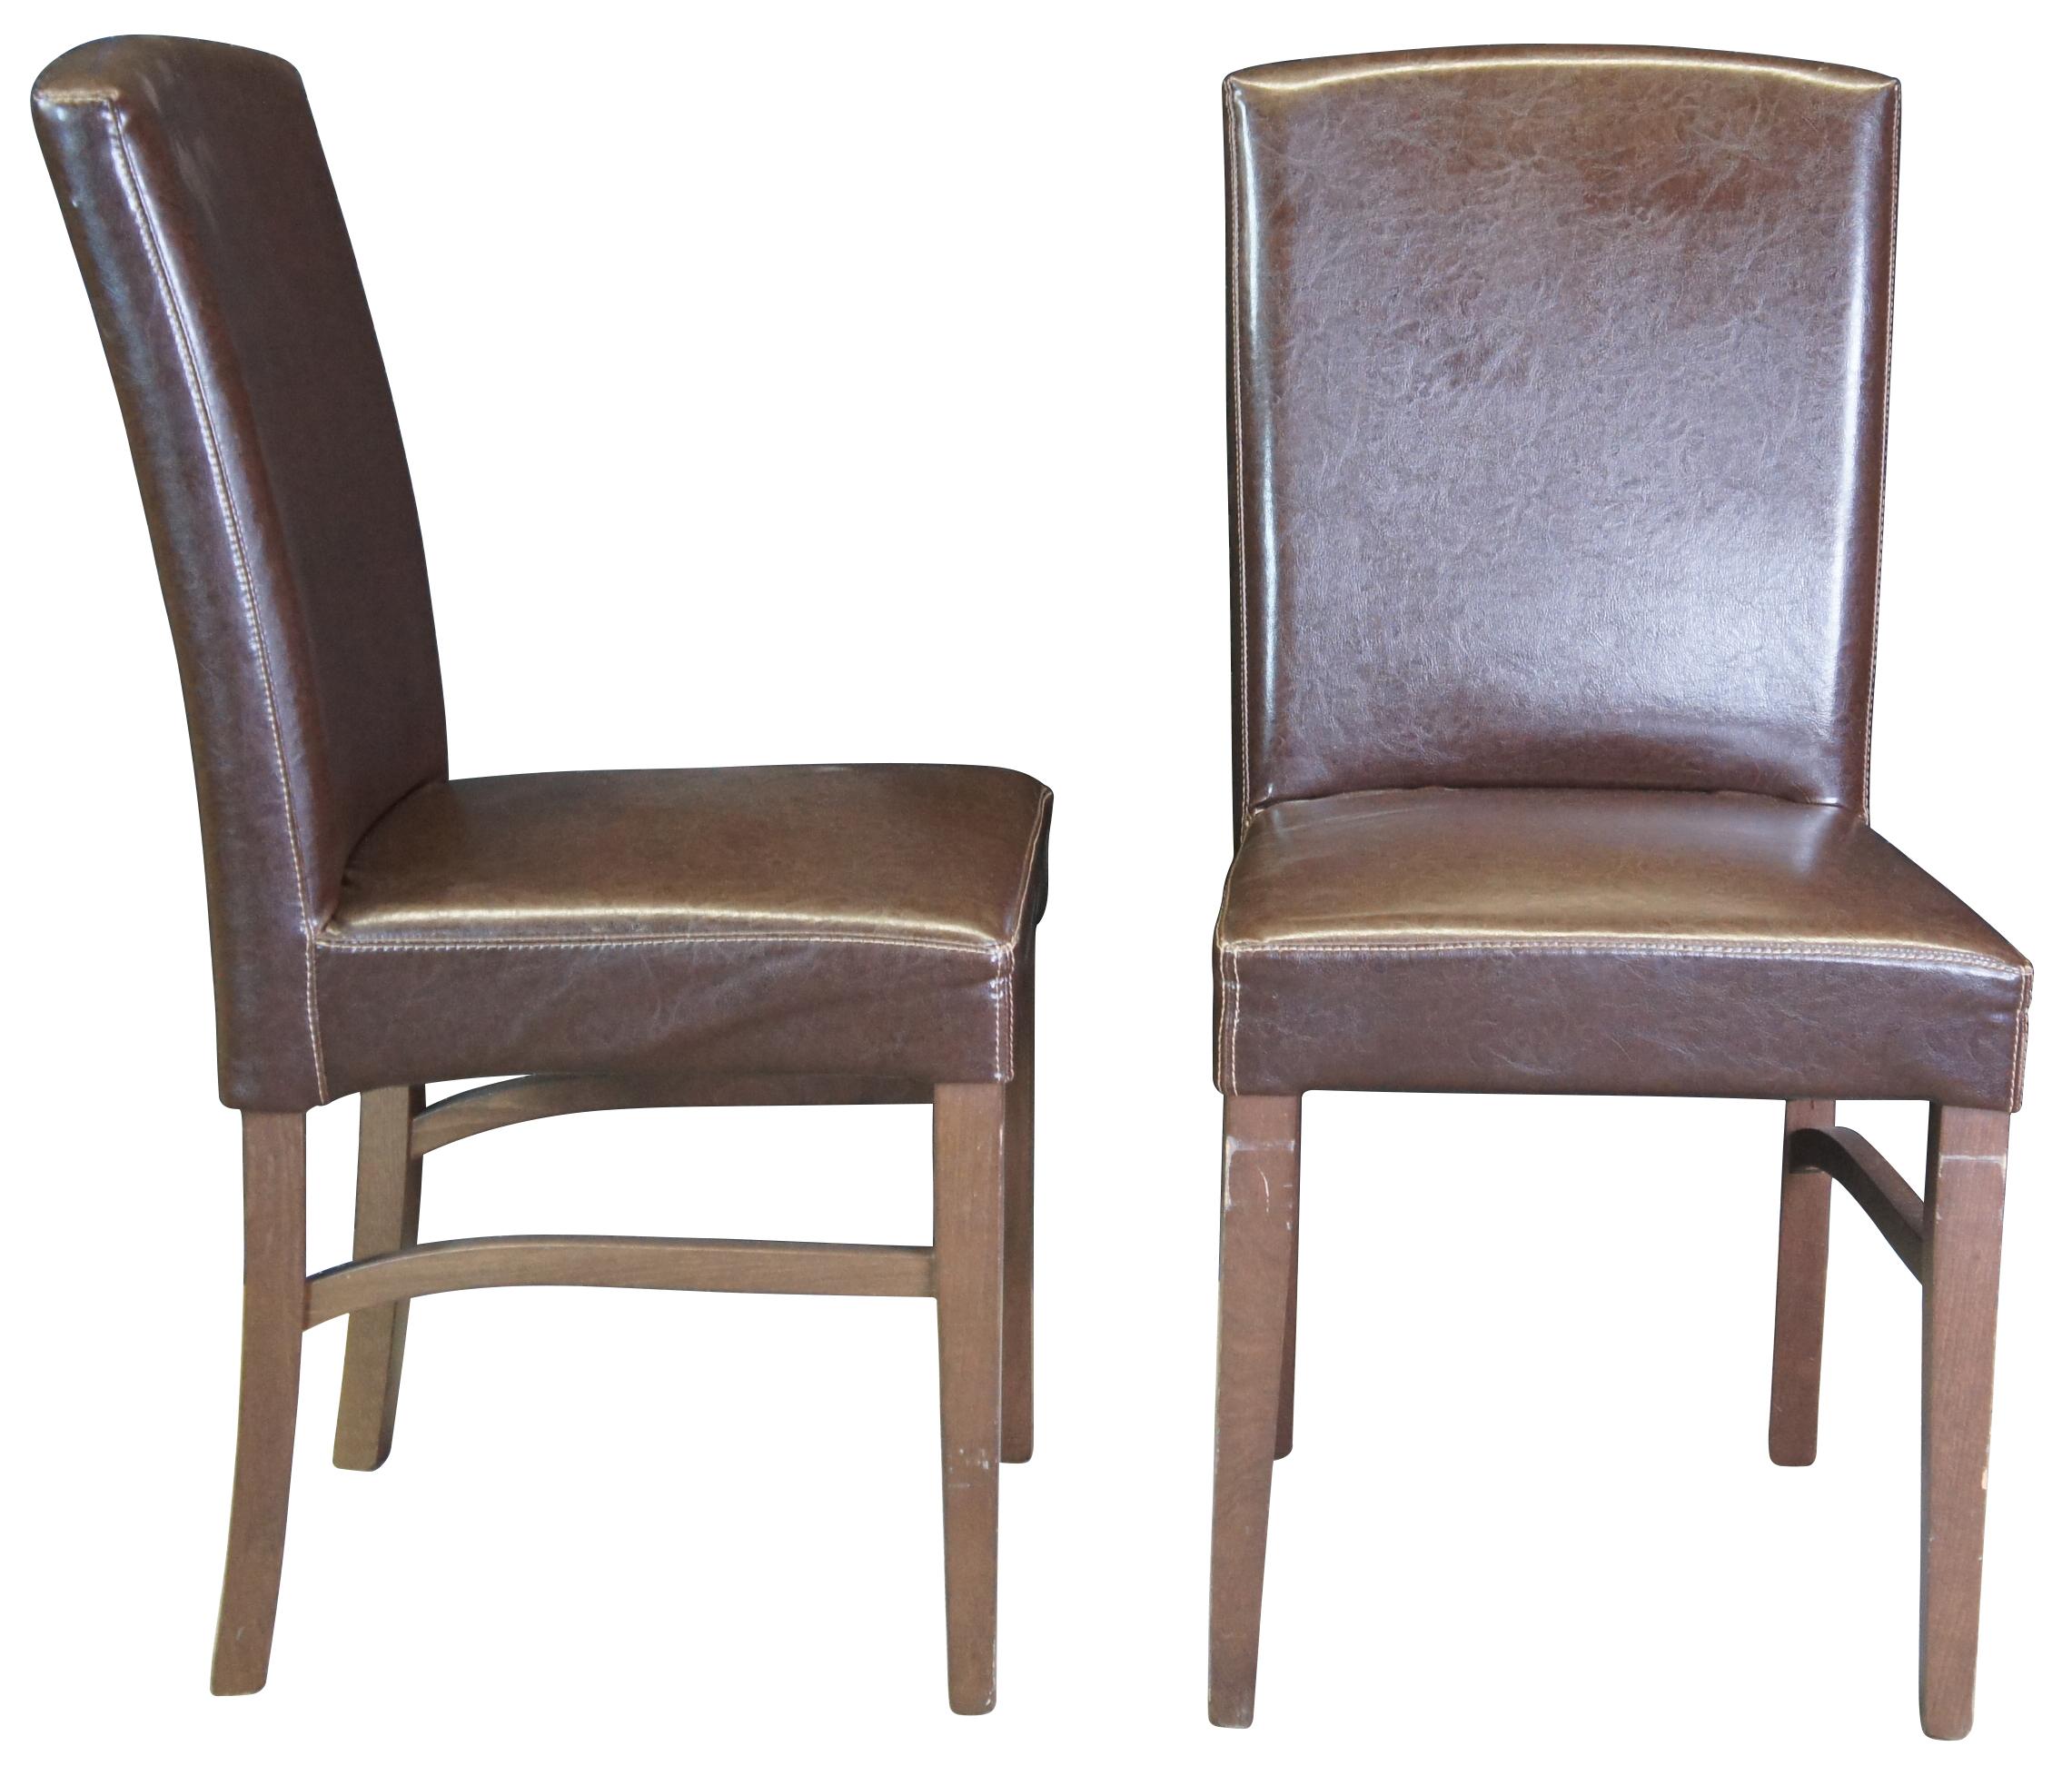 6 Arhaus Capri dining chairs. Each stool features a bowed crest rail with padded backrest and seat upholstered in a brown faux leather. They stand on brown stained tapered legs with shaped box-stretchers.